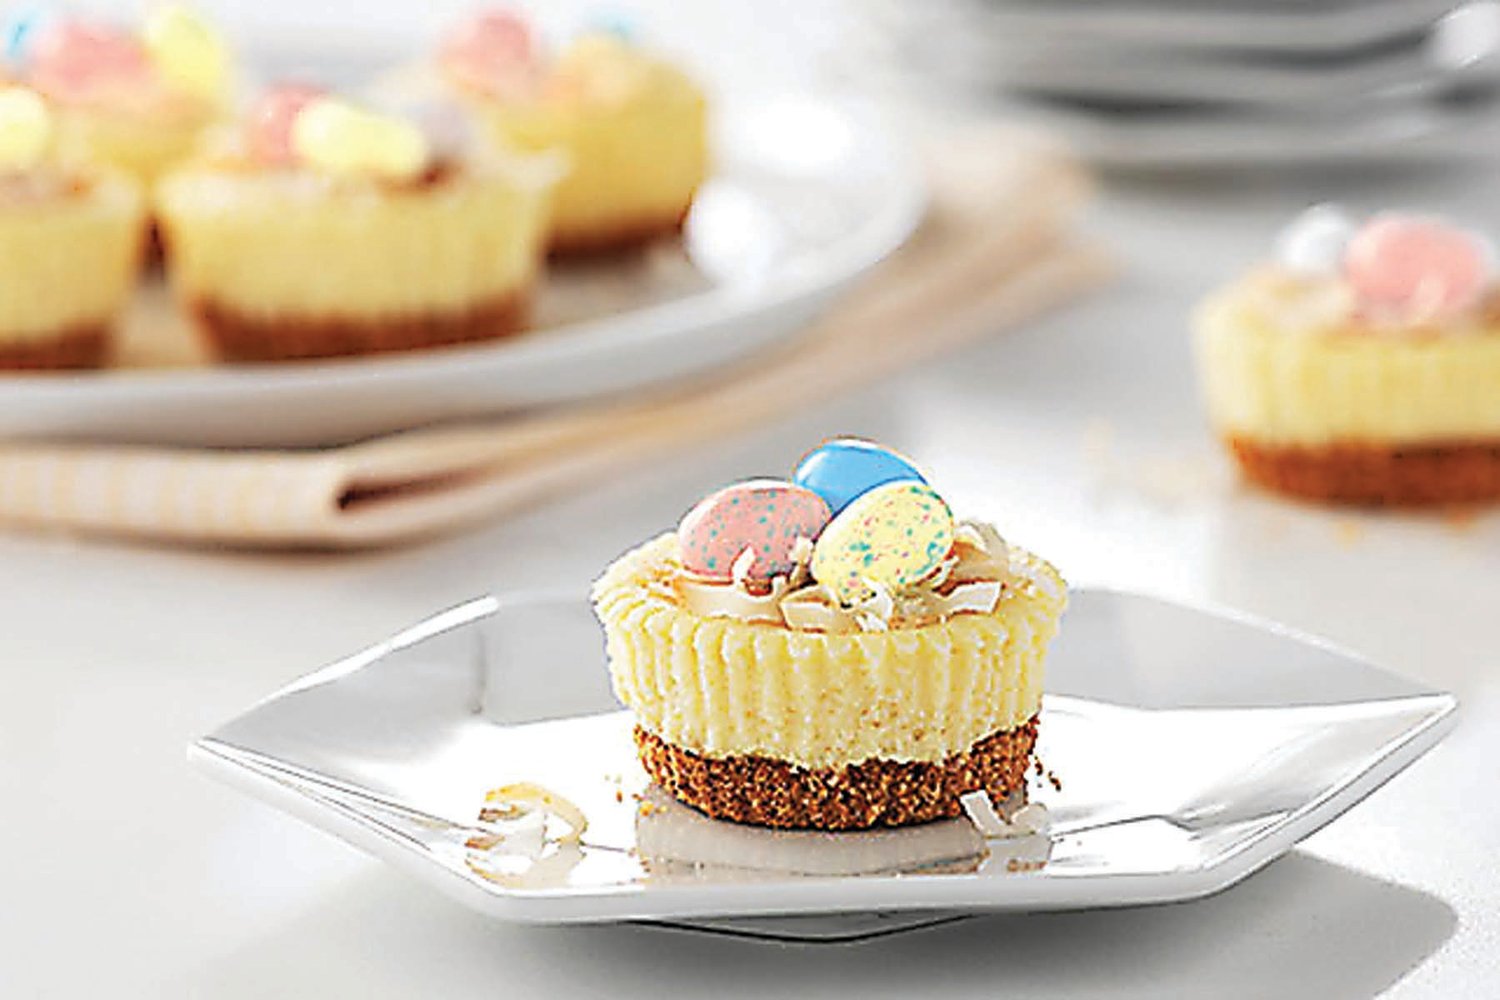 Cream cheese is used to make the filling of these little “nests” with candy eggs to complete the look.